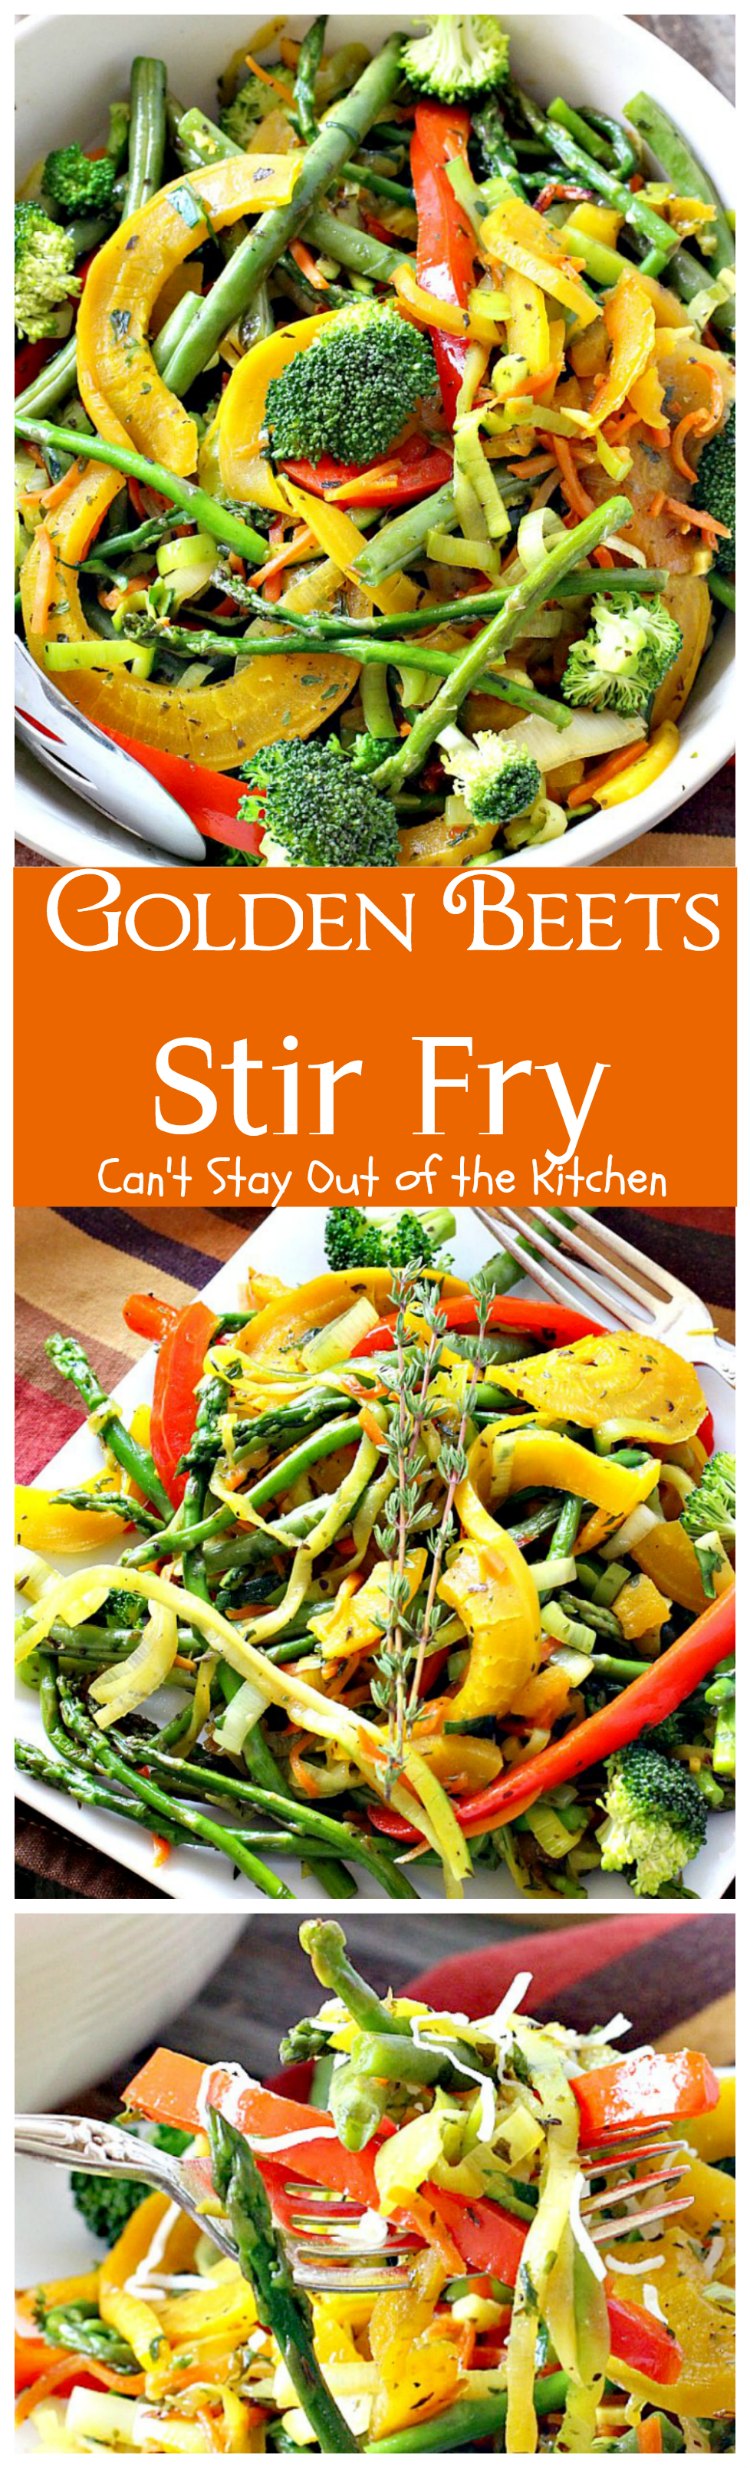 Golden Beets Stir Fry | Can't Stay Out of the Kitchen